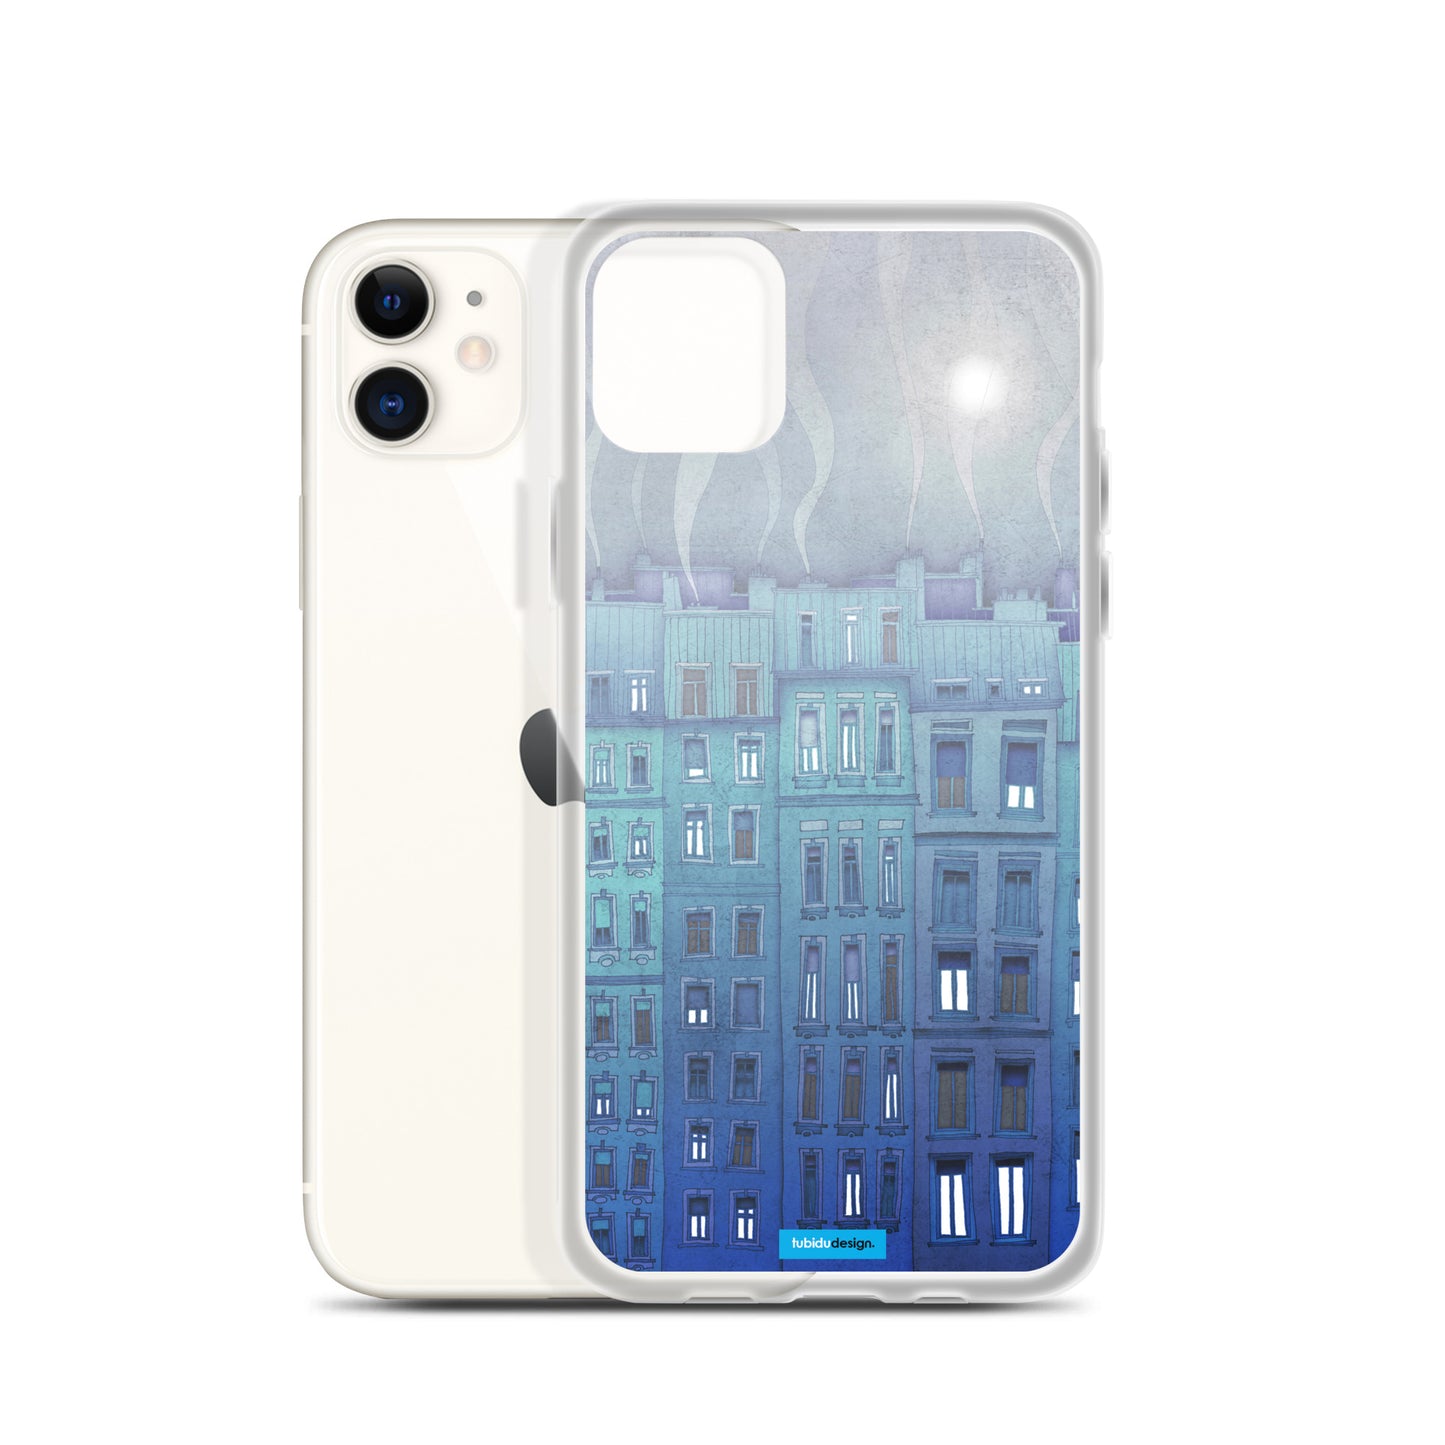 Foggy day in Paris - Illustrated iPhone Case